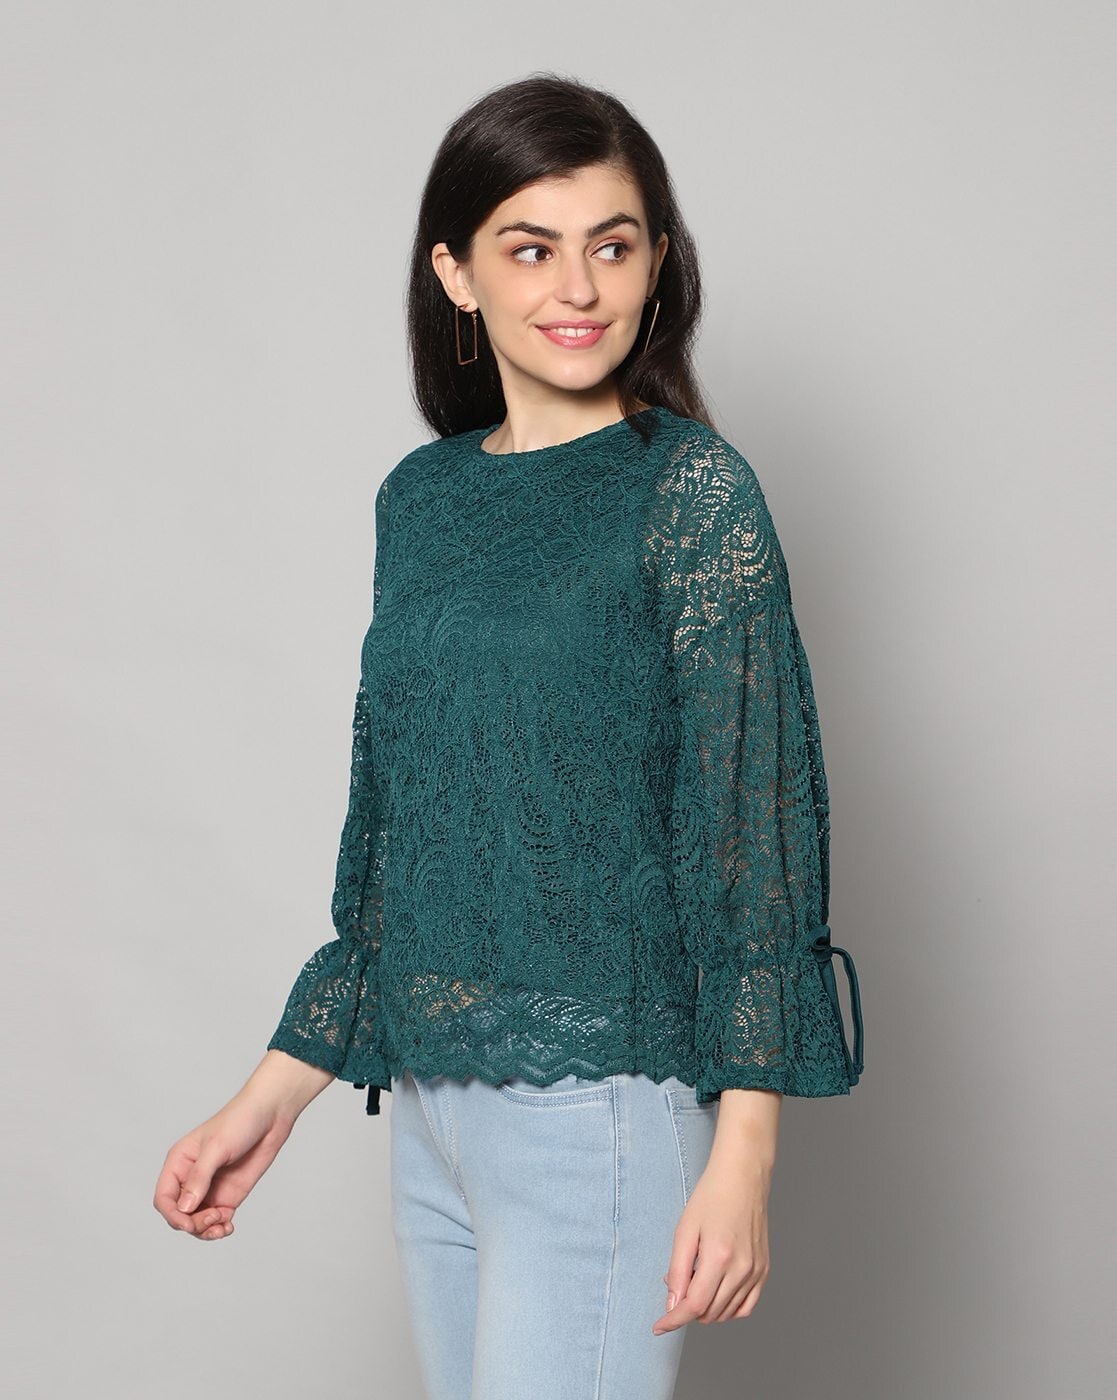 GBSELL Sweatshirts For Women Lace Tops Plus Size India